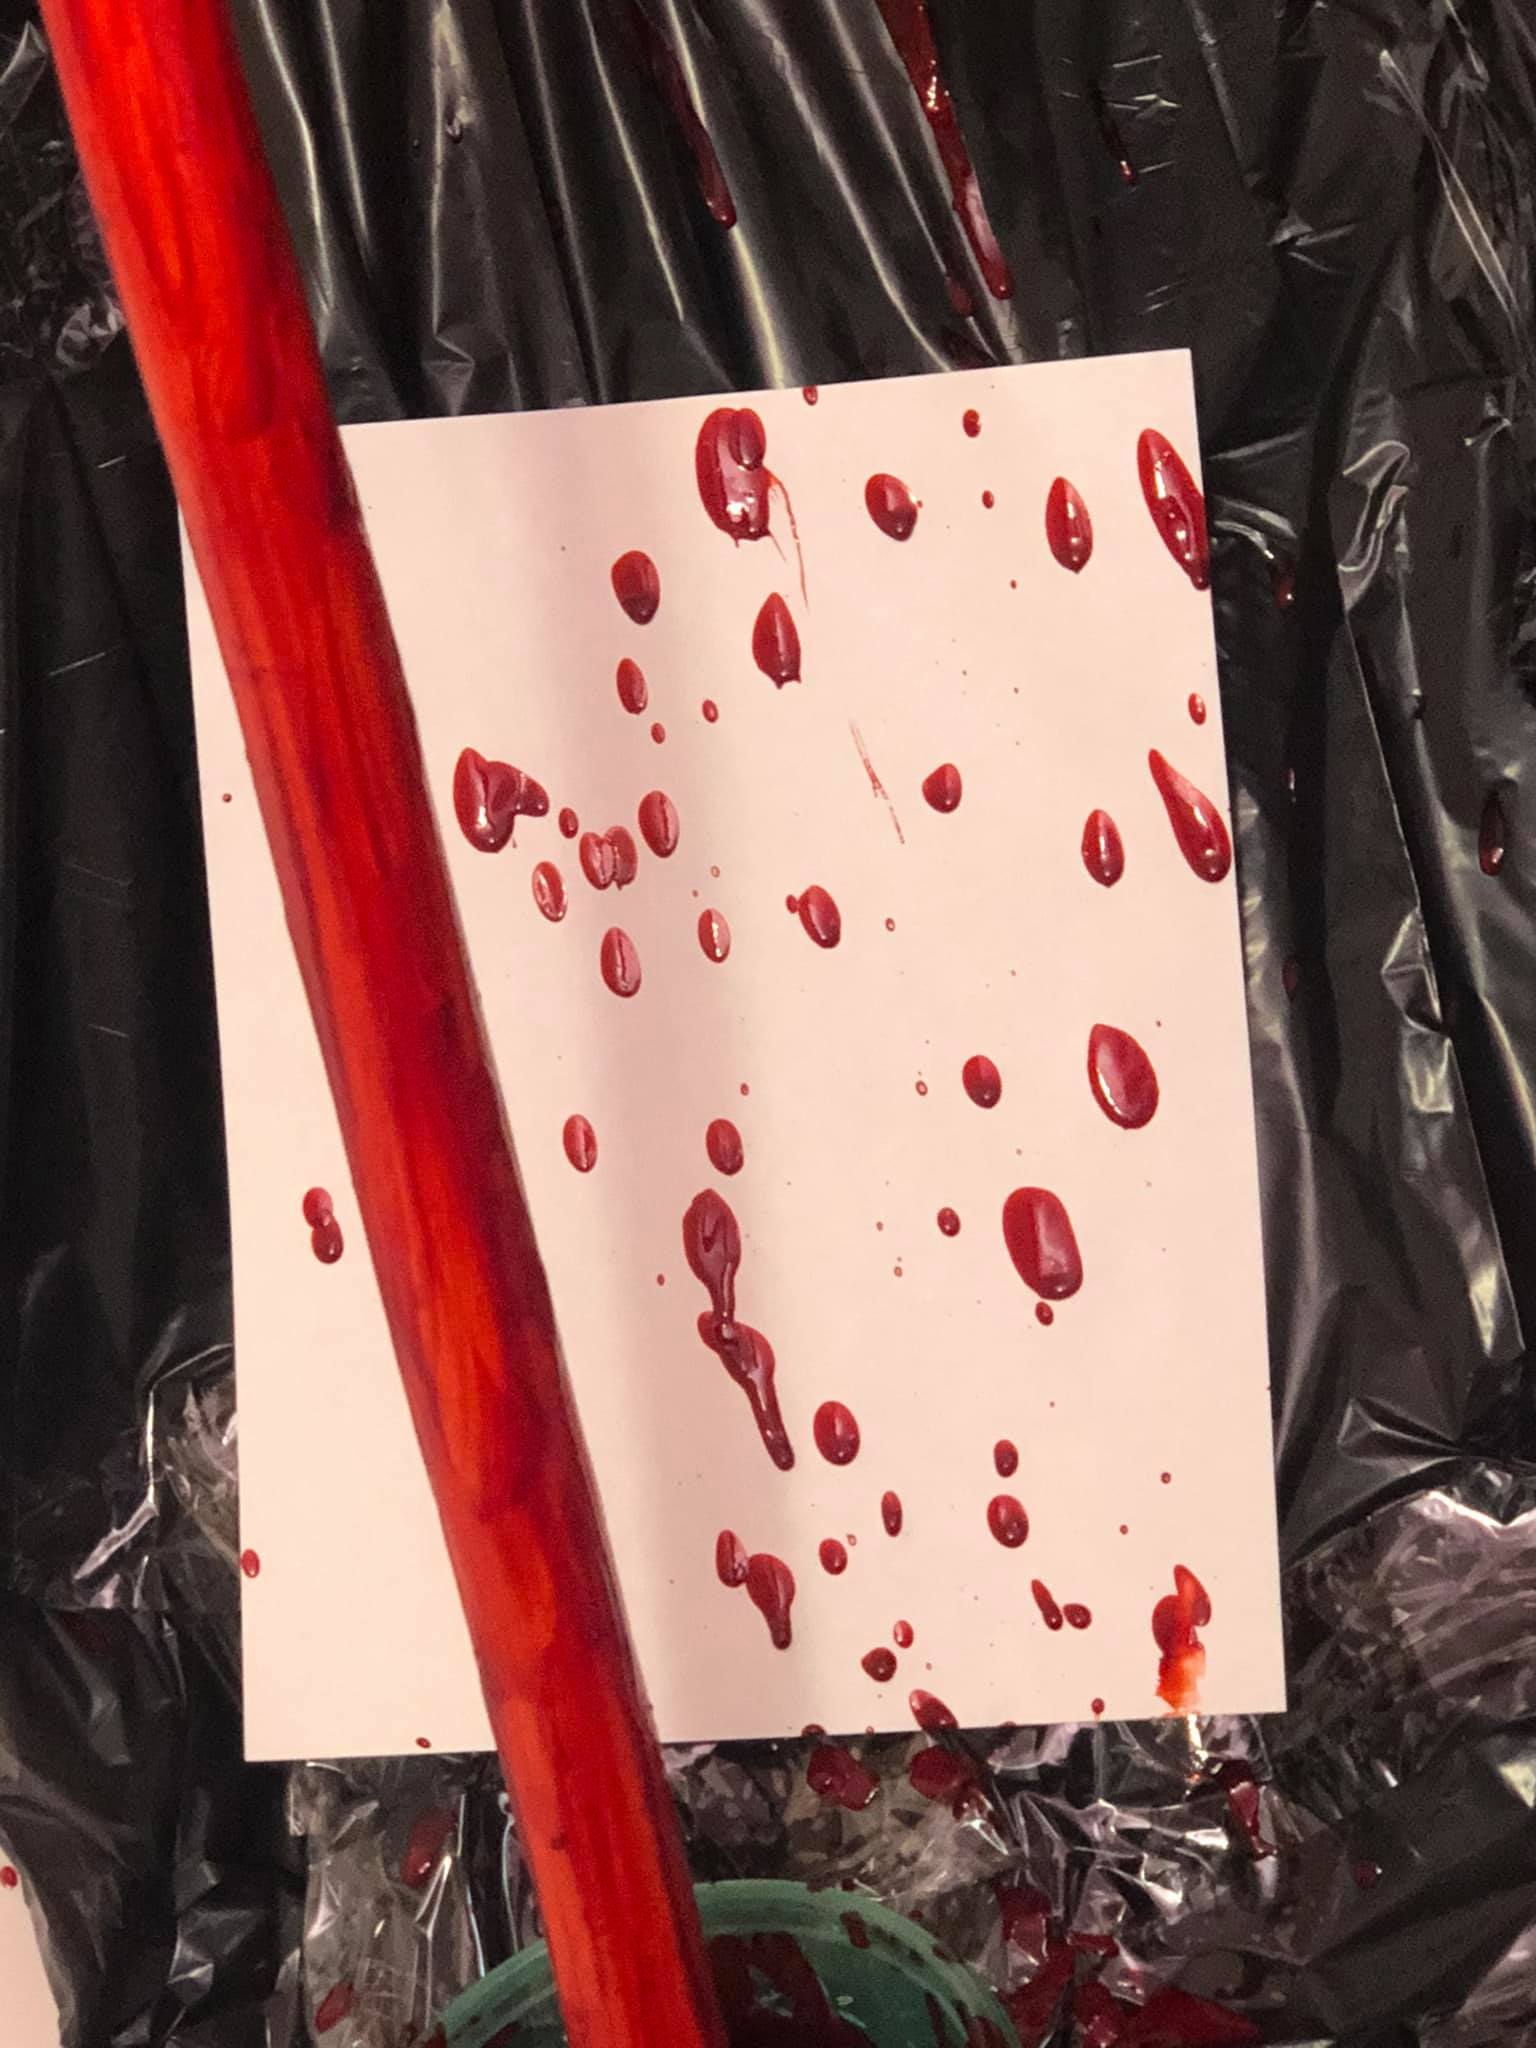 Droplets of blood, in a very vivid contrast of red against white. This is the lower canvas.